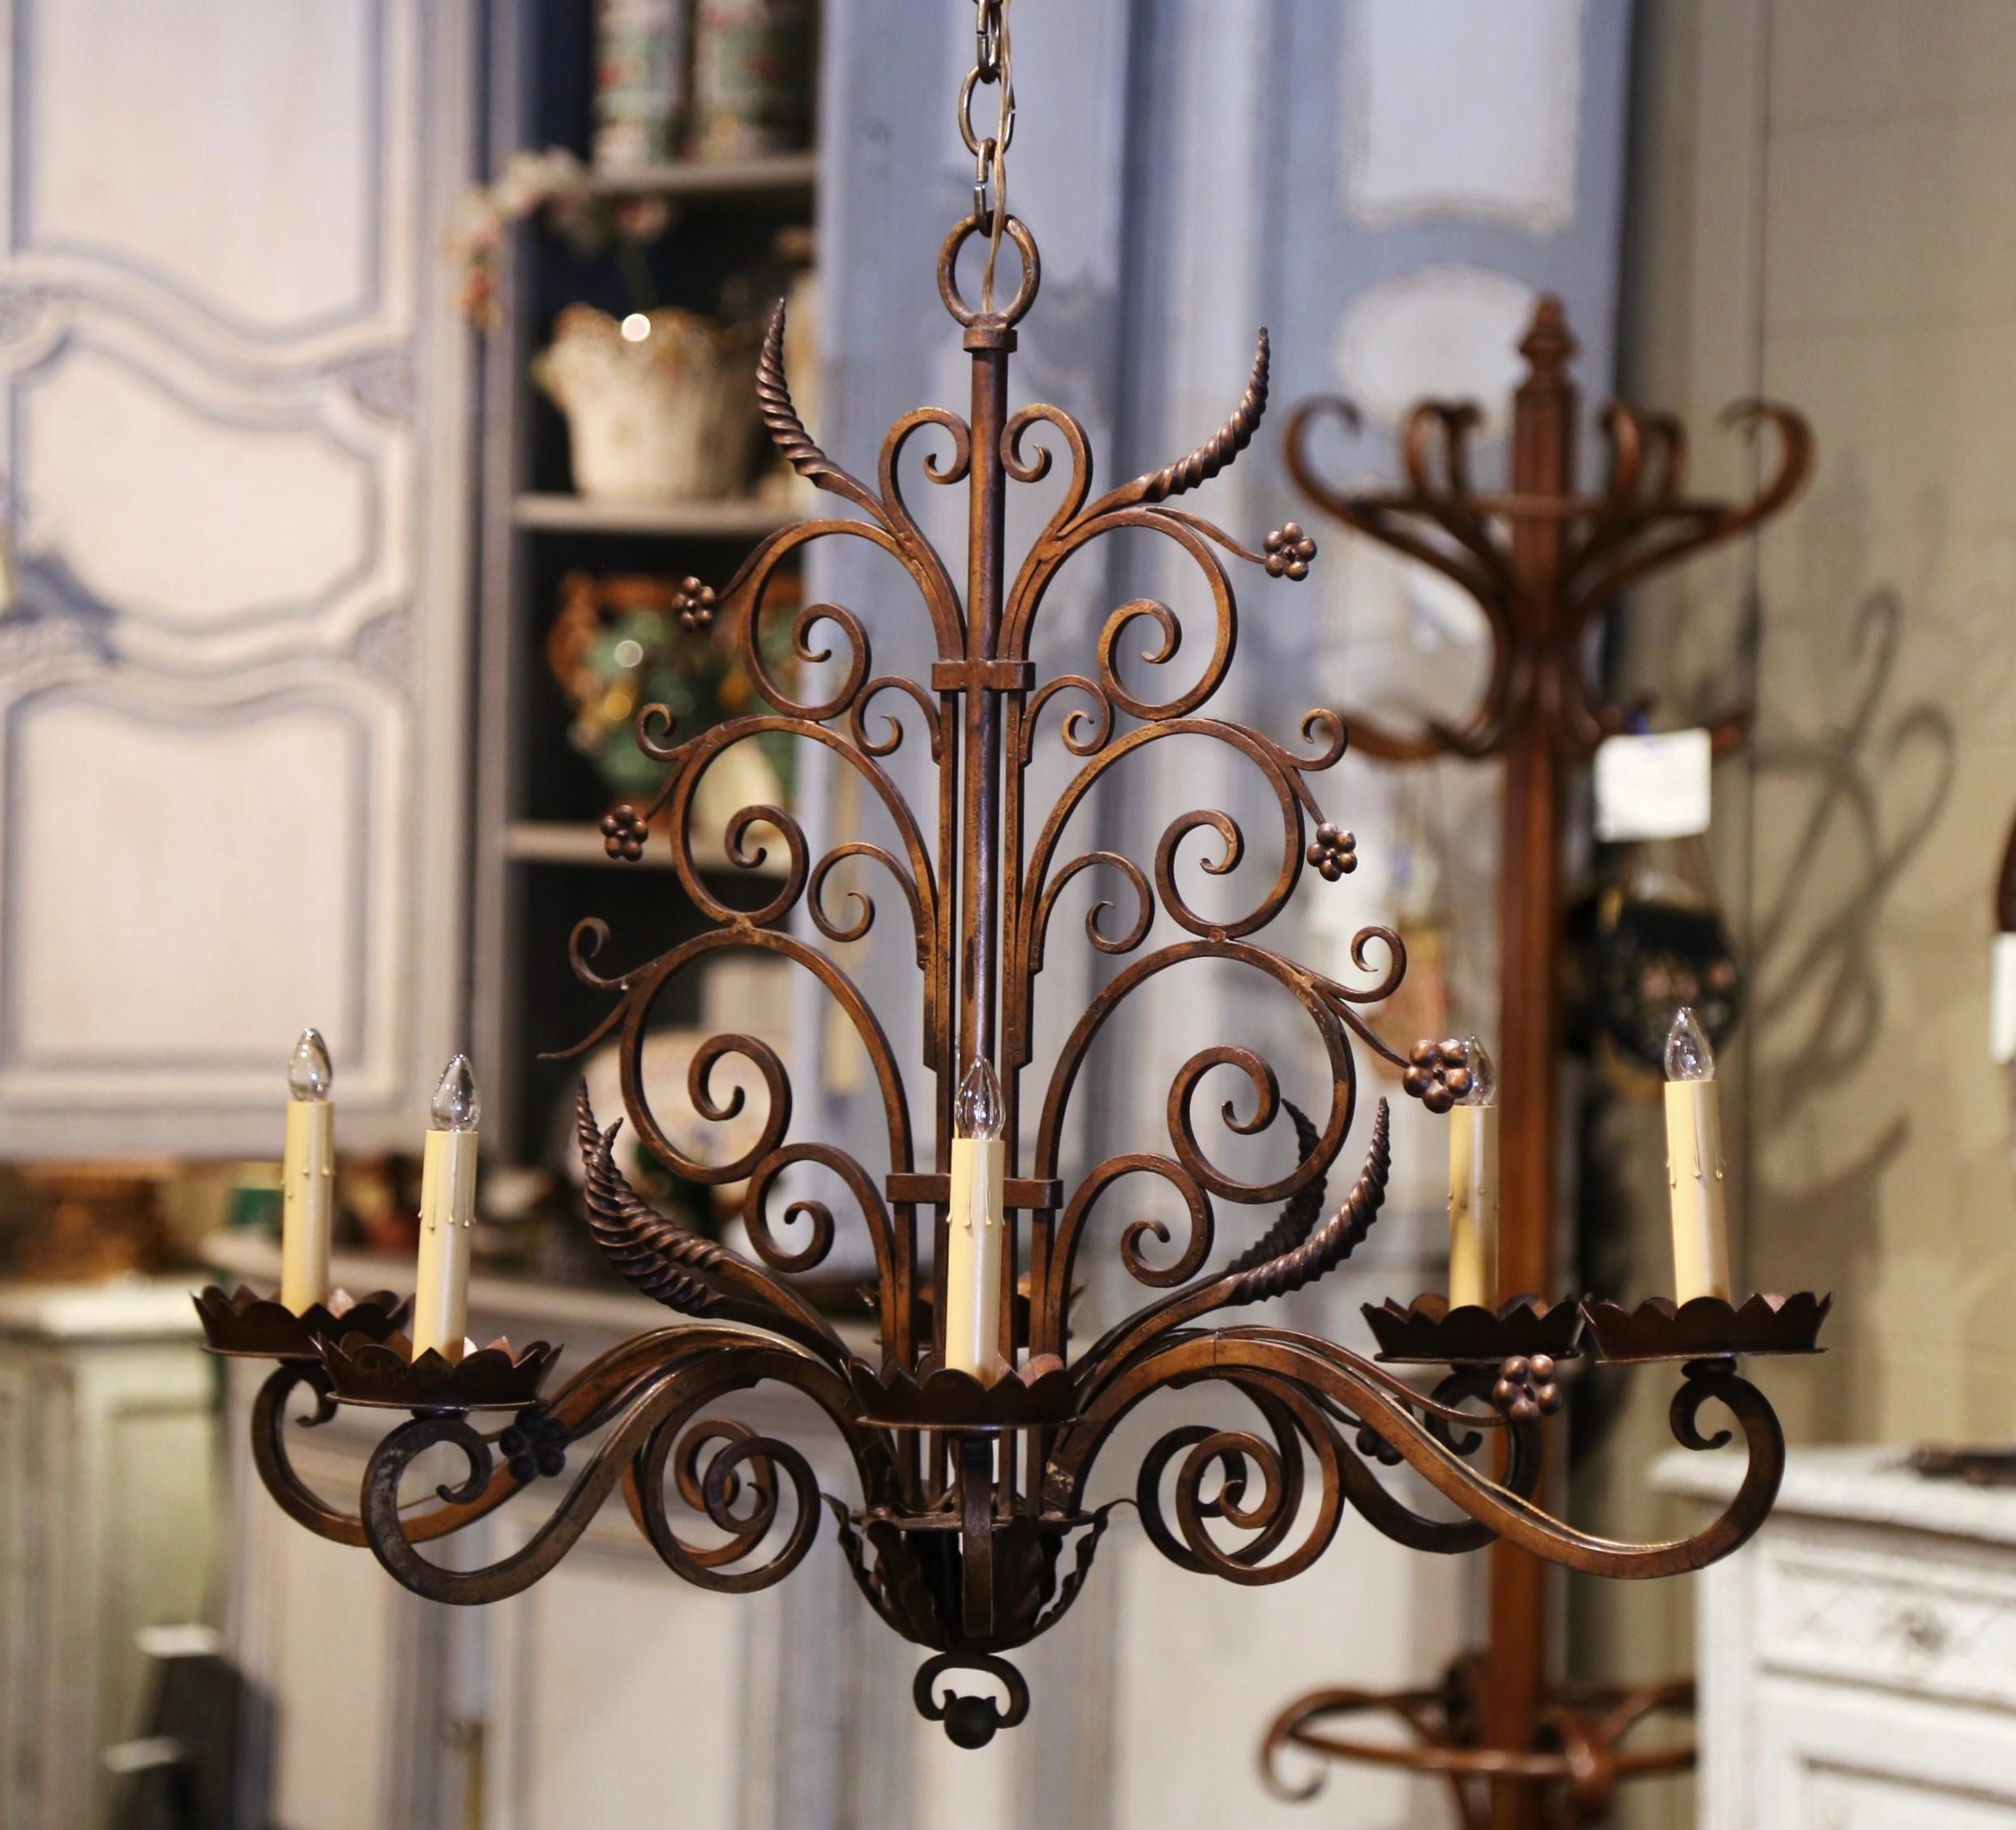 This elegant, scrolling, oblong chandelier would make a lovely addition to a breakfast or dining room. Crafted from iron, the chandelier was made in France, circa 1900. The large chandelier with metal flowers, twisted and scrolled decor, has six